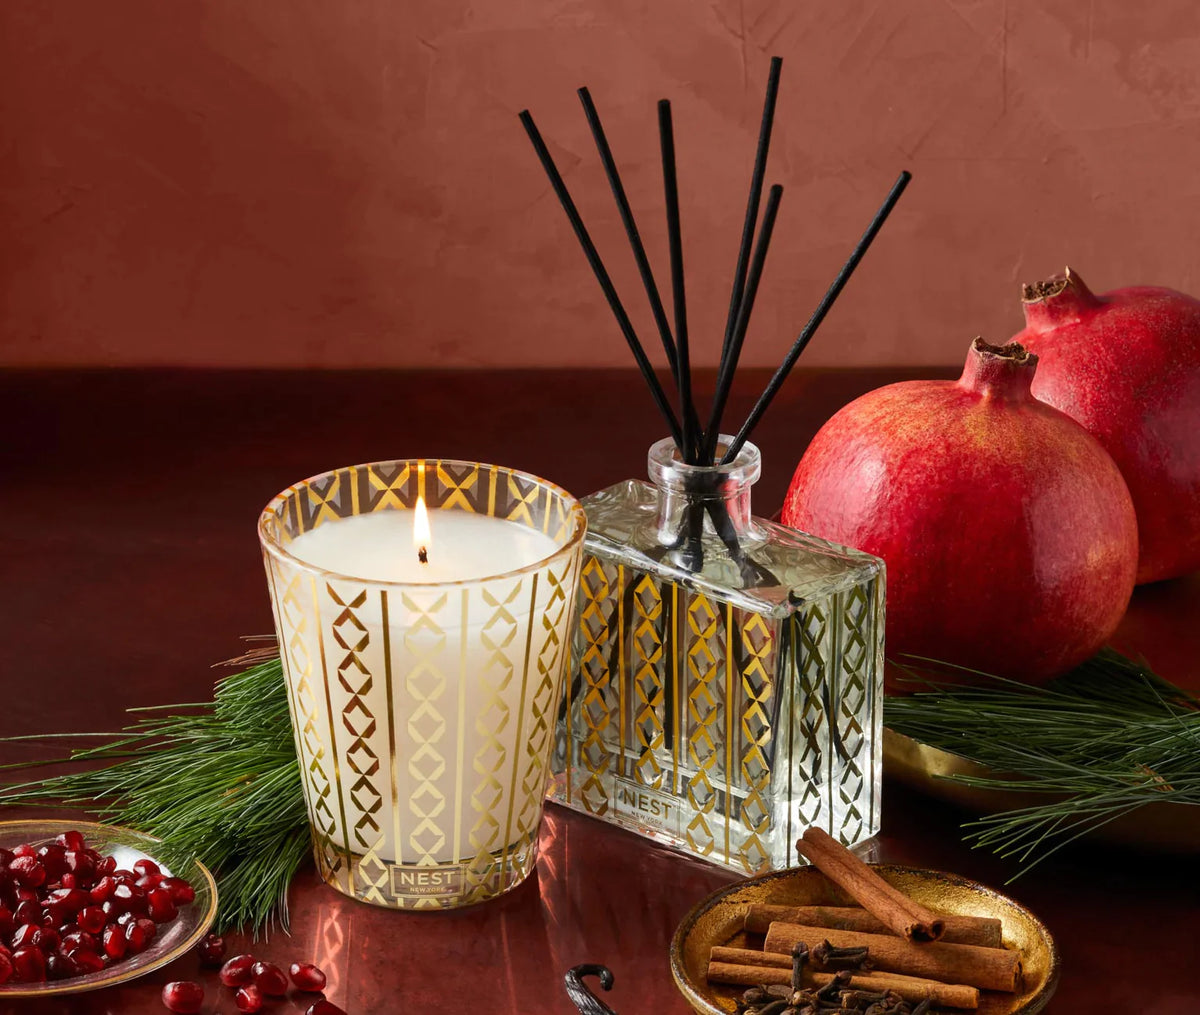 Holiday Classic Candle and Reed Diffuser Set